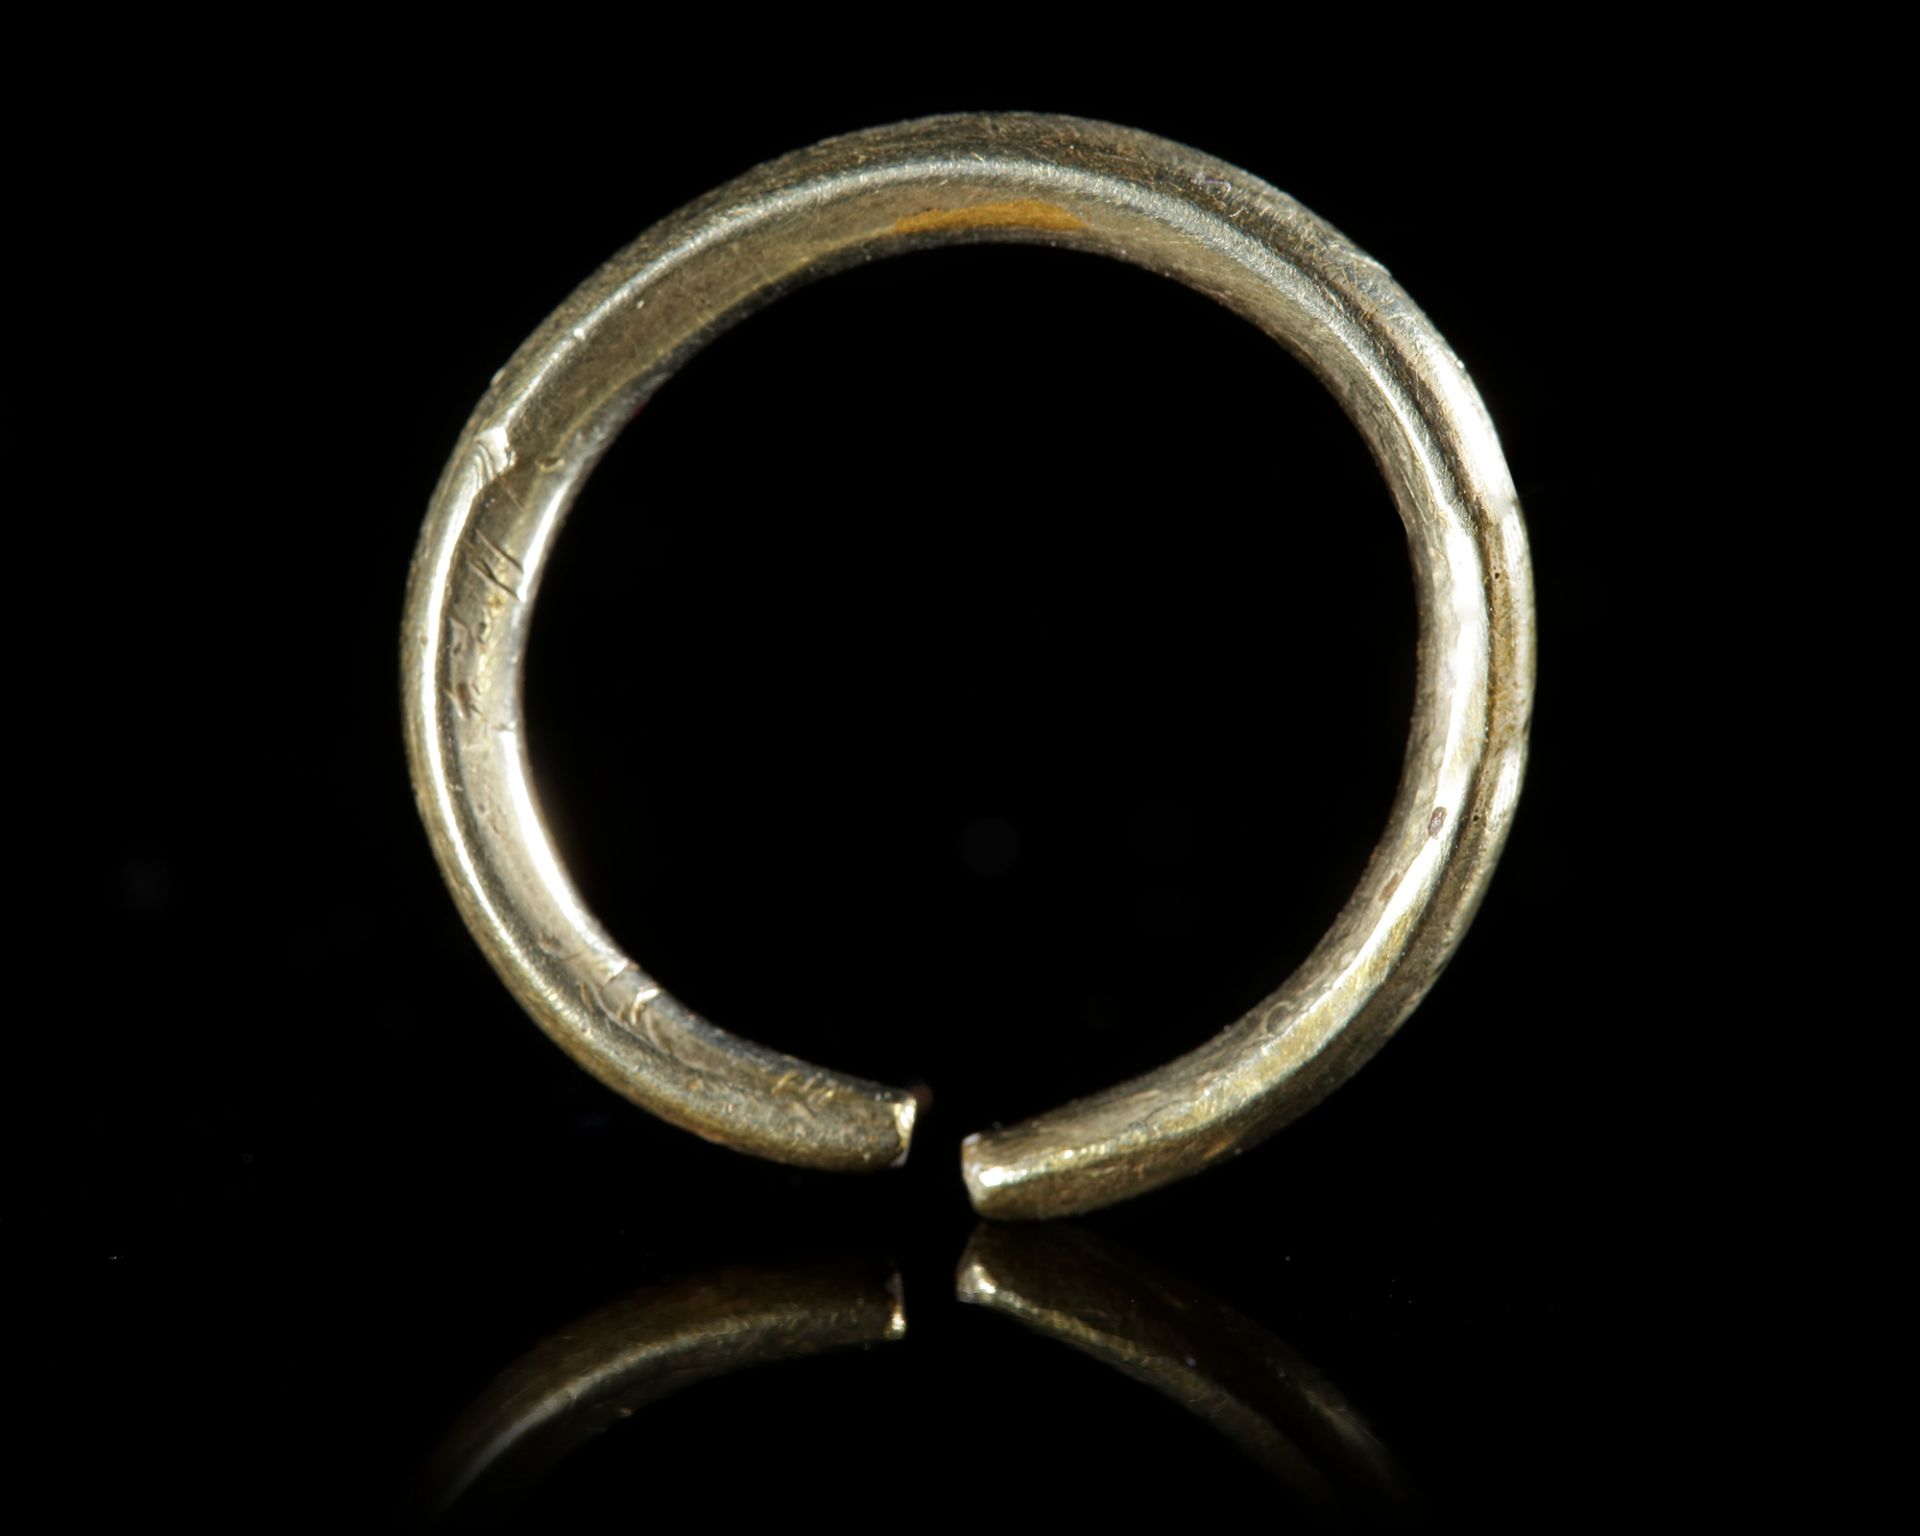 AN ELECTRUM RING WITH PHOENICIAN INSCRIPTION, 6-7TH CENTURY BC - Image 2 of 3